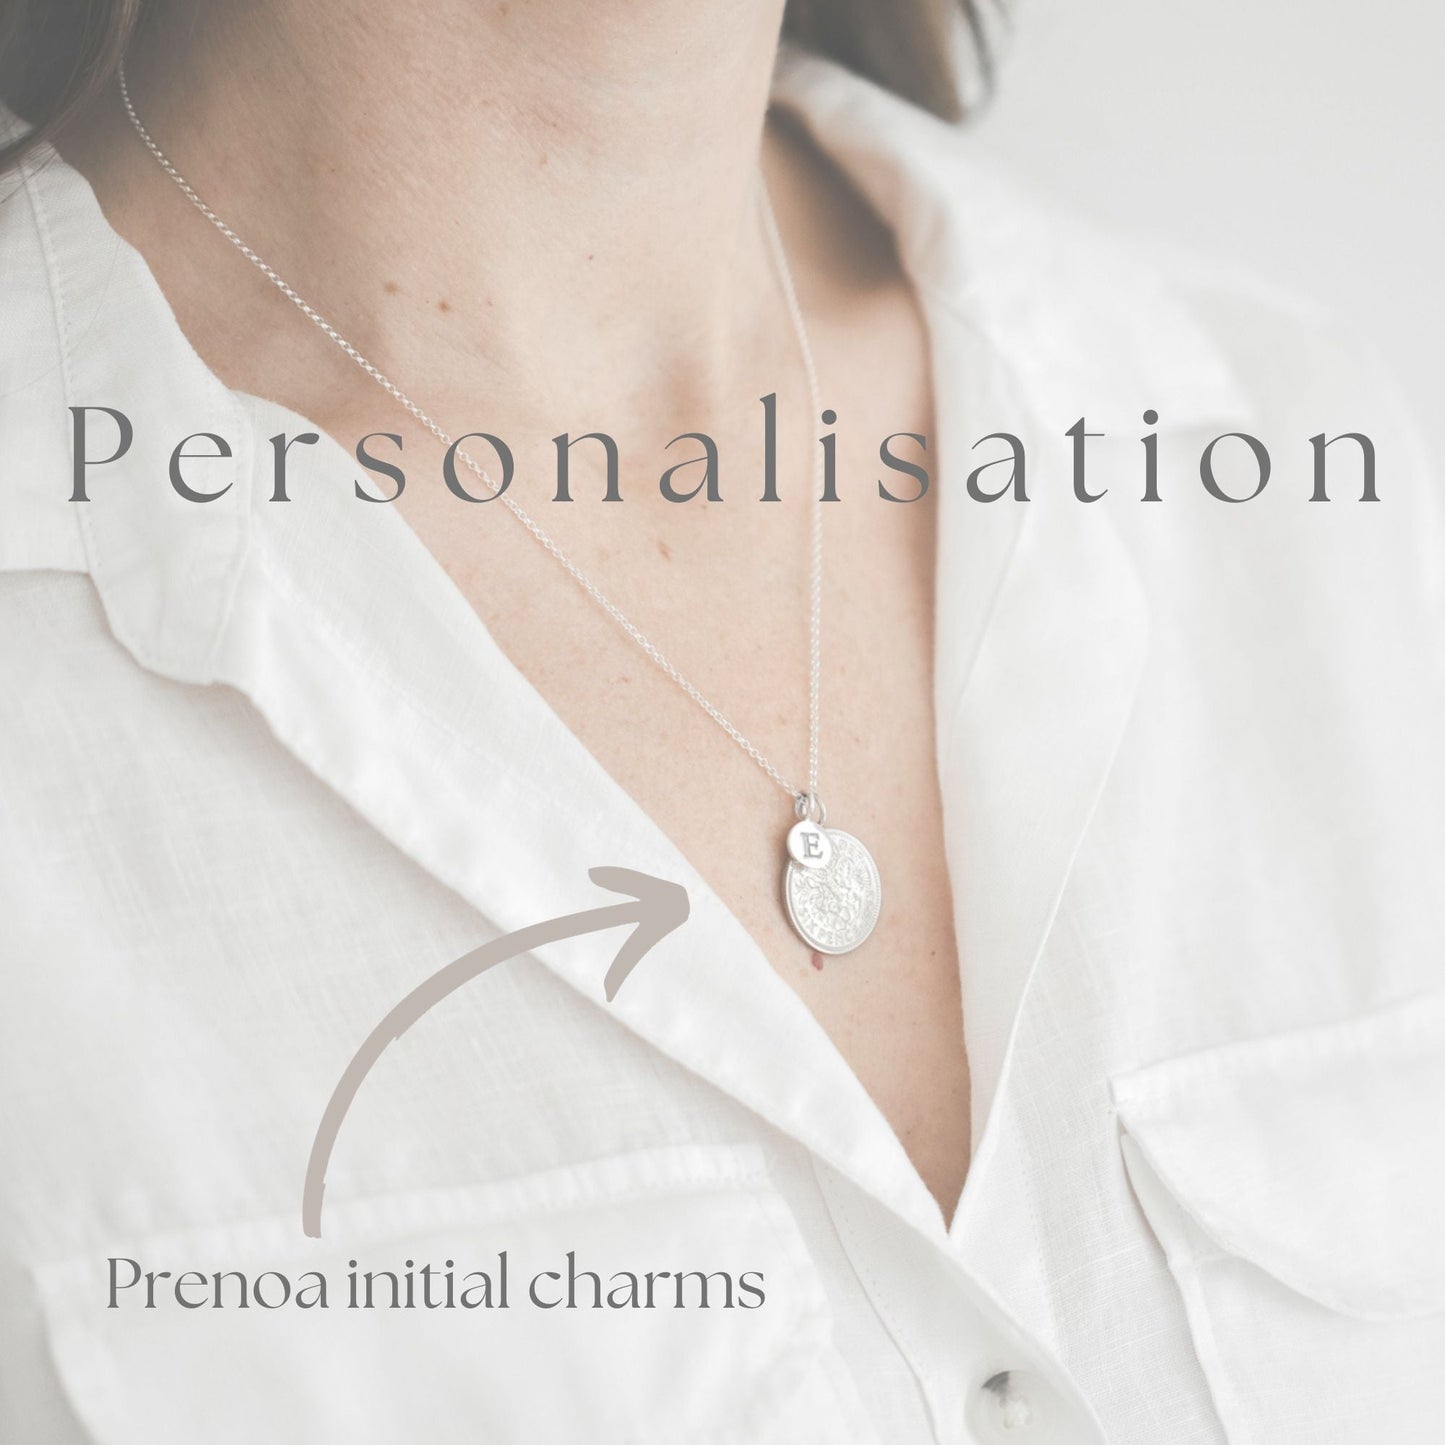 A sterling silver initial charm personalises your necklace